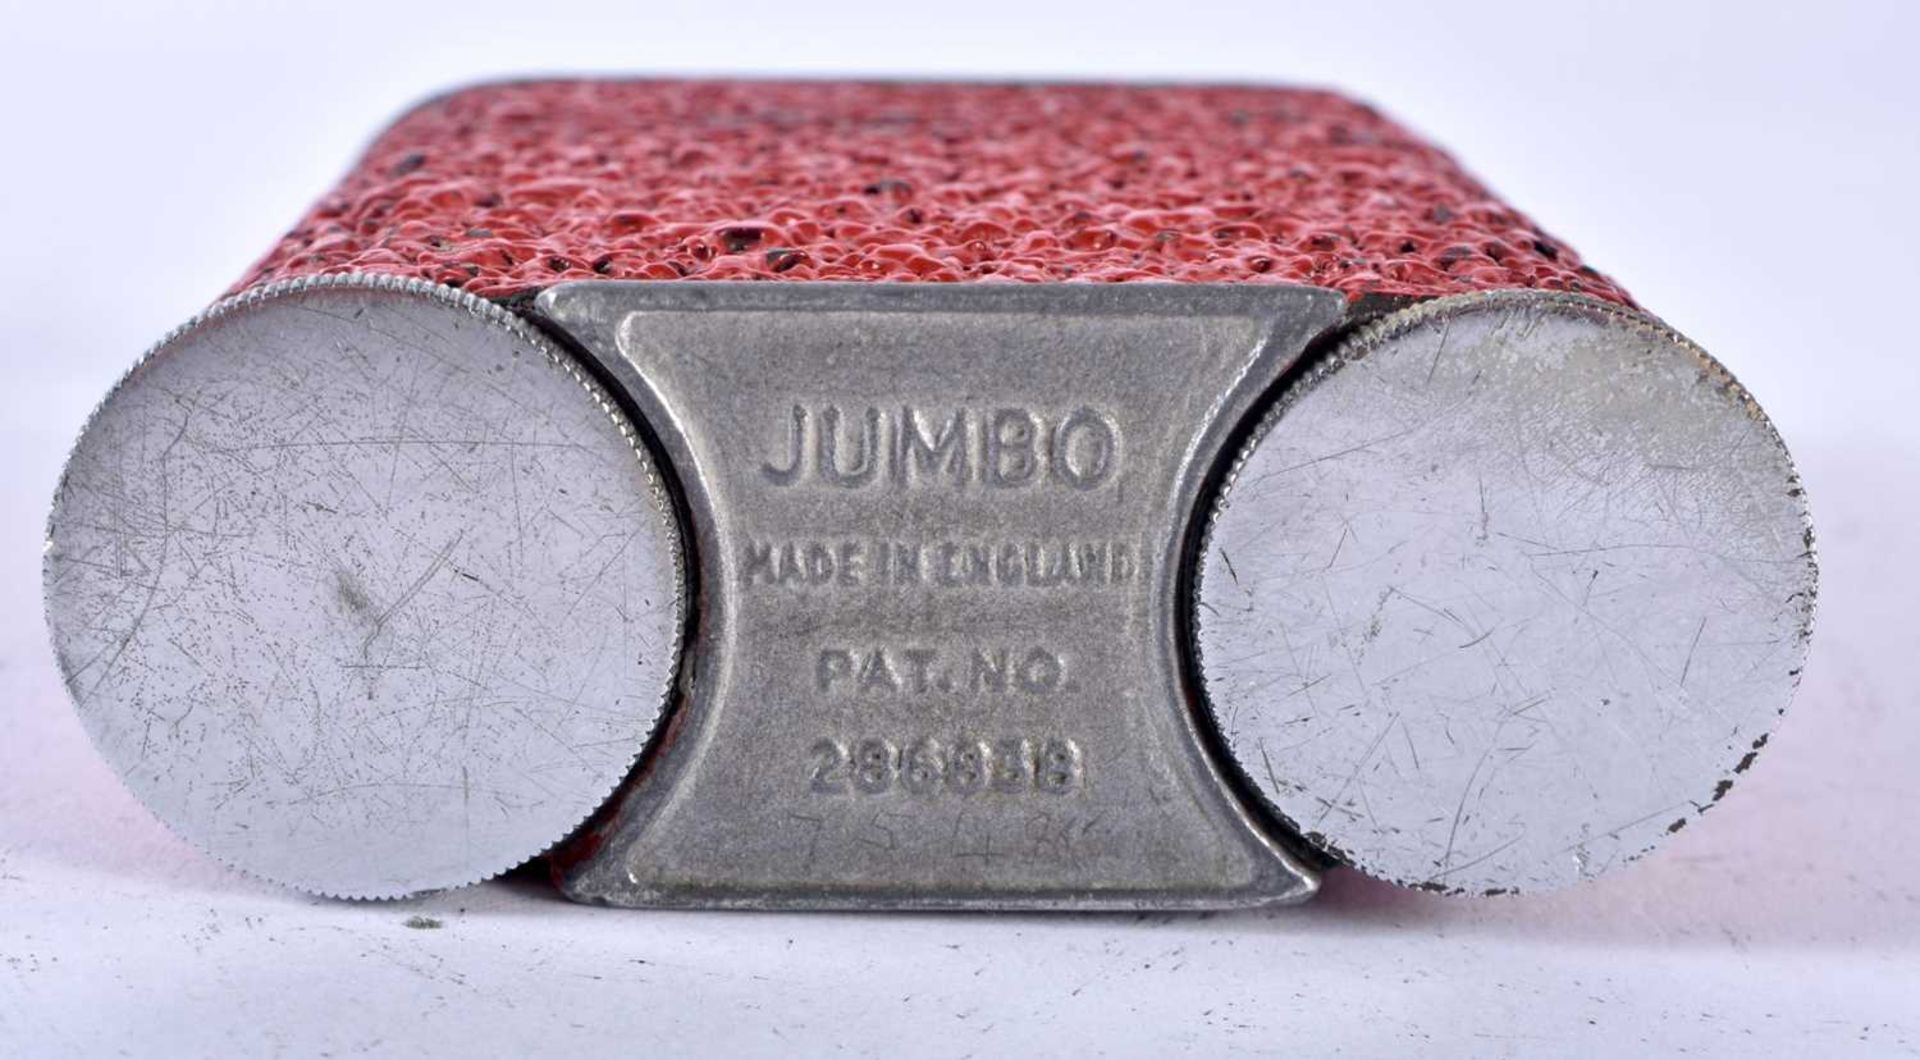 A Dunhill style Jumbo lighter contained in a Mottled Red Texture effect case, patent no.286838. - Image 5 of 5